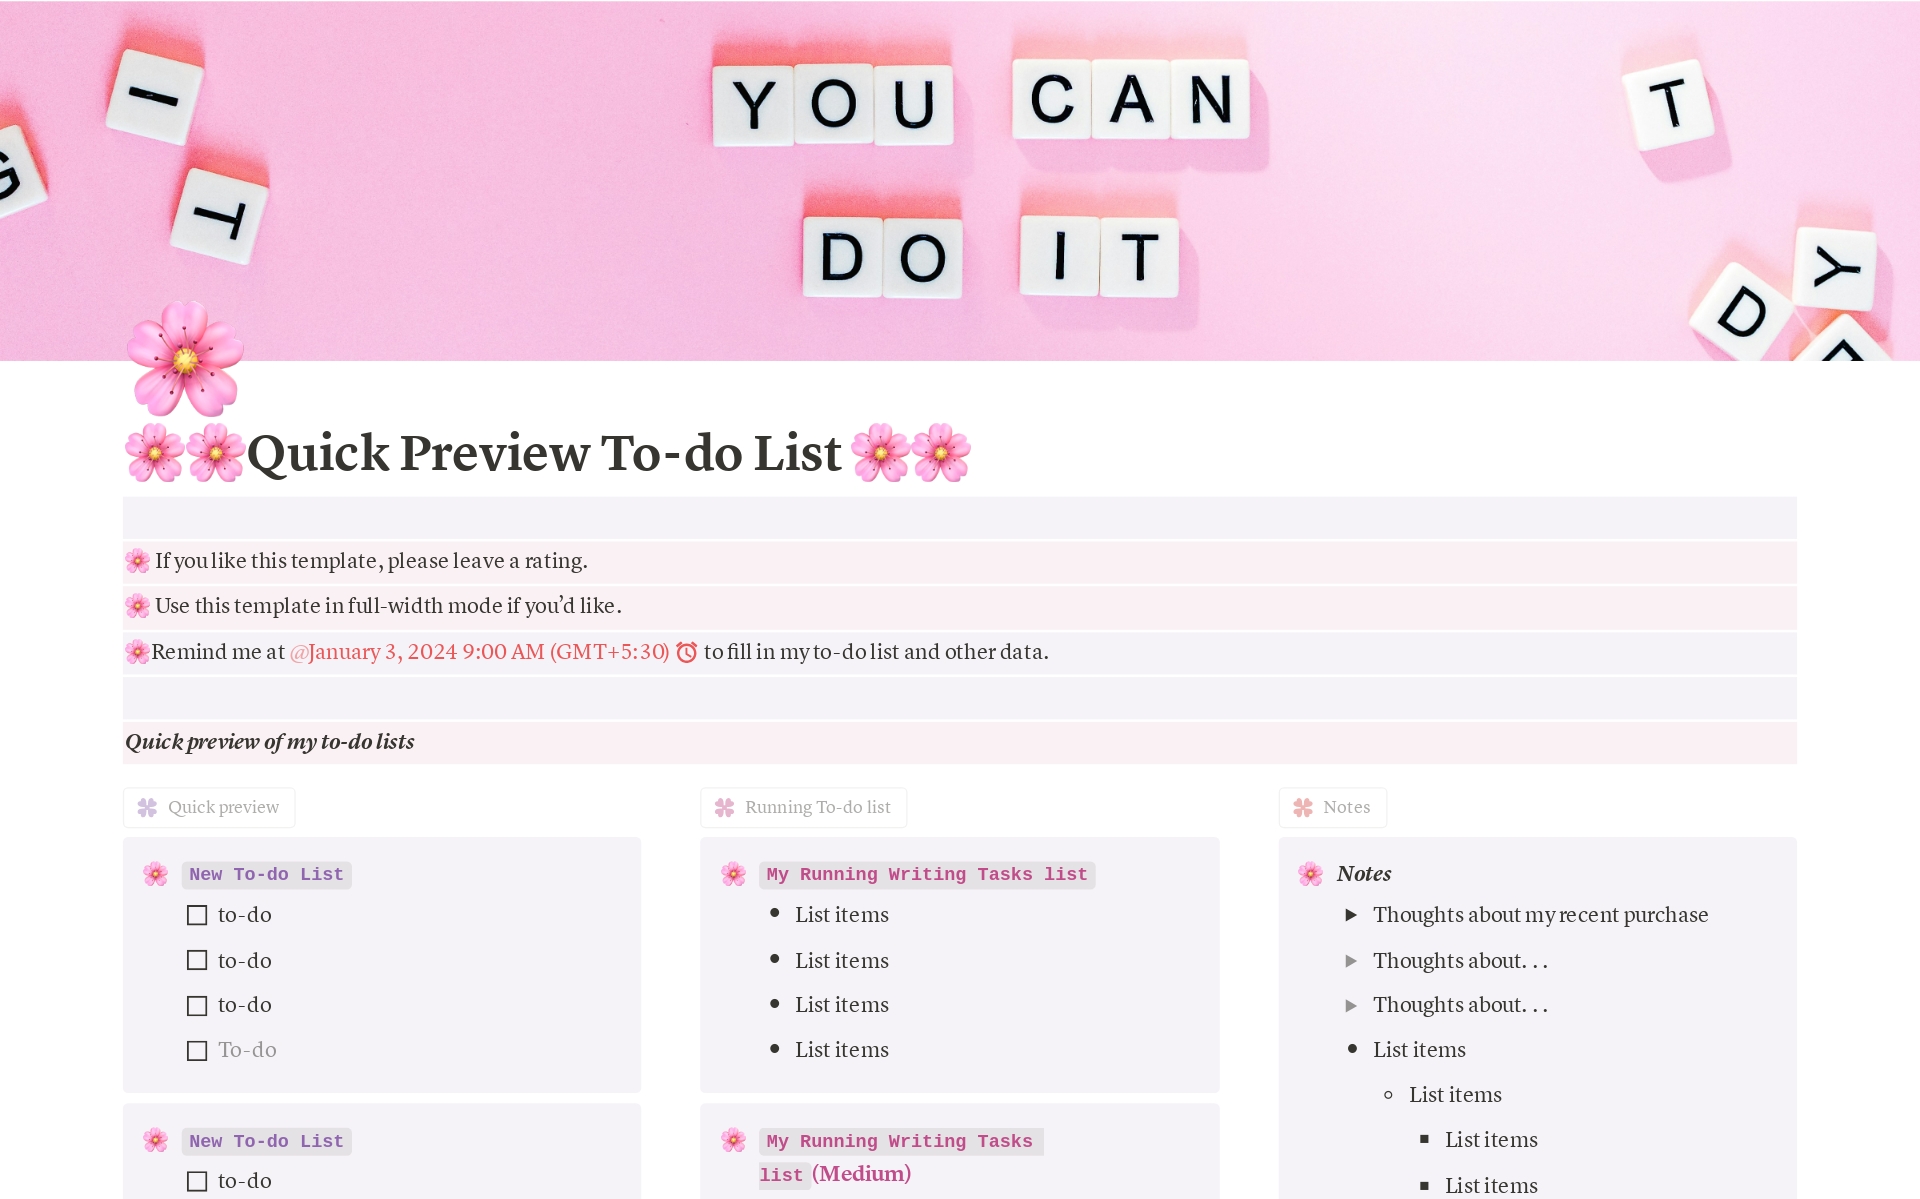 Struggling with keeping track of your daily to-dos and notes?

This quick preview to-do list planner solves that problem for you.

Introducing the "Aesthetic & Simple Quick Preview To-do List" Notion template – your ultimate tool for streamlined planning and task management. 